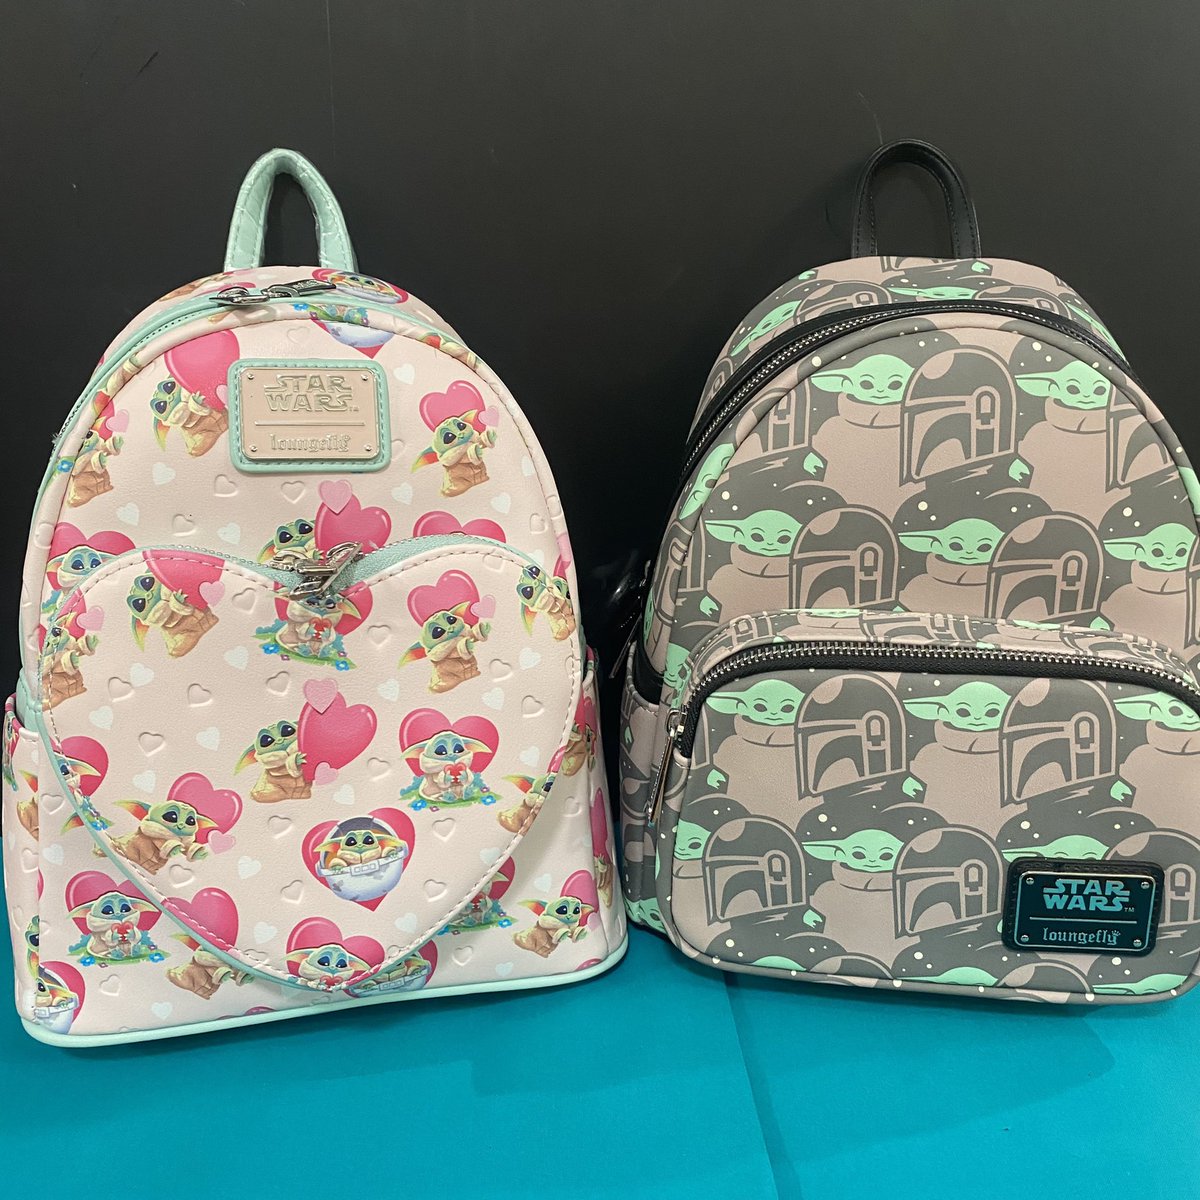 💫 STAR WARS 💫 Check out our range of #StarWars @Loungefly bags including the newly arrived Dark Side tattoo backpack ✨ #Loungefly #disney #loungeflydisney #disneyloungefly #loungeflycollector #disneystyle #loungeflybackpack #loungeflycollection #loungeflyaddict #funko